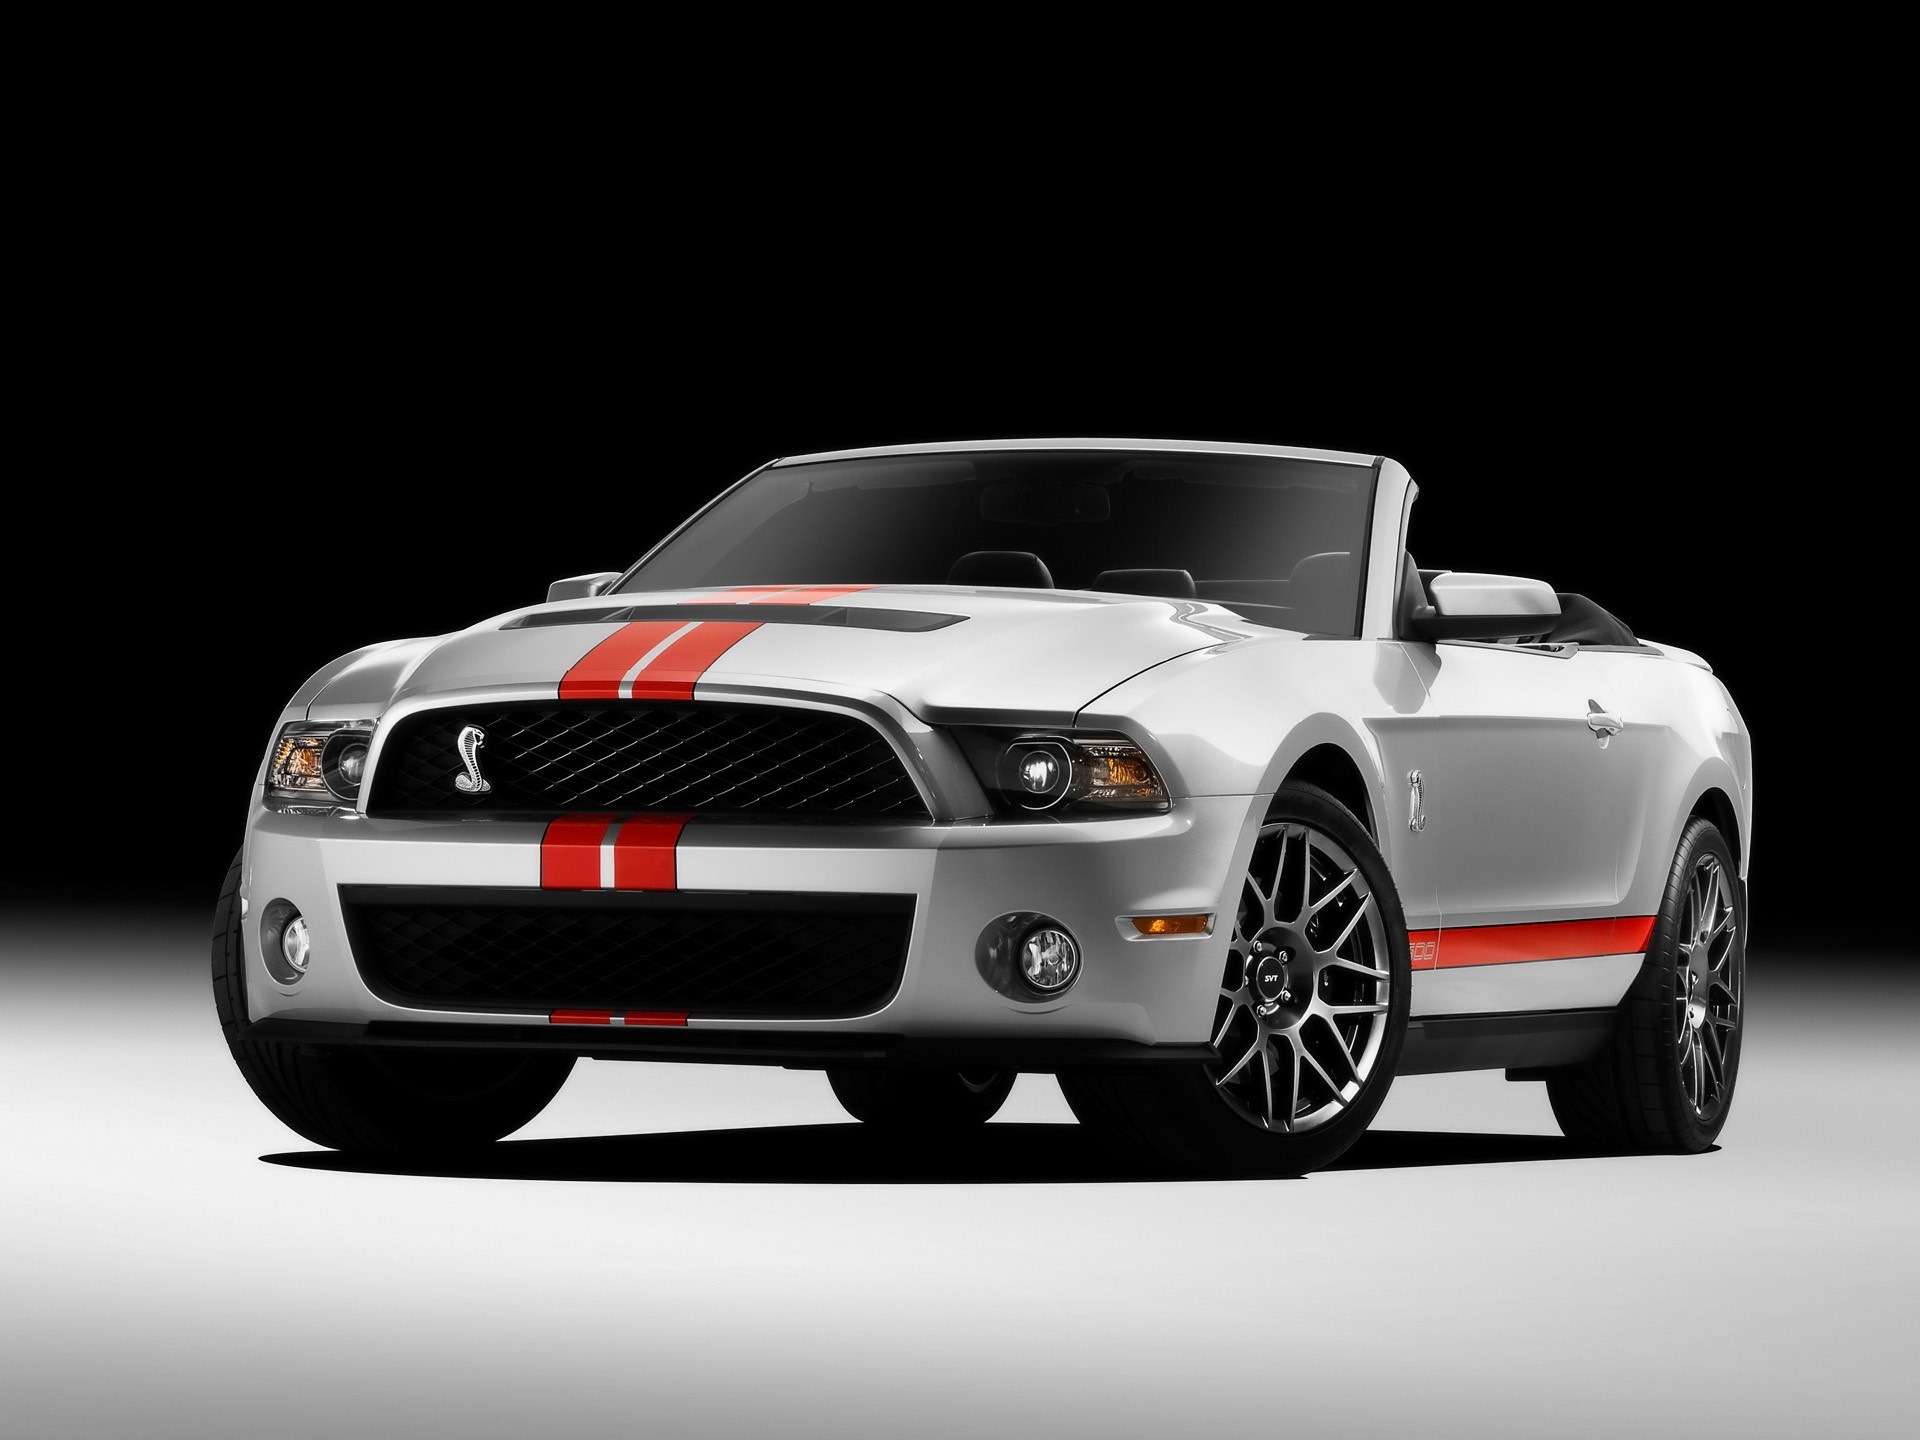 Ford Mustang Shelby Gt 500 Convertible - HD Wallpaper 